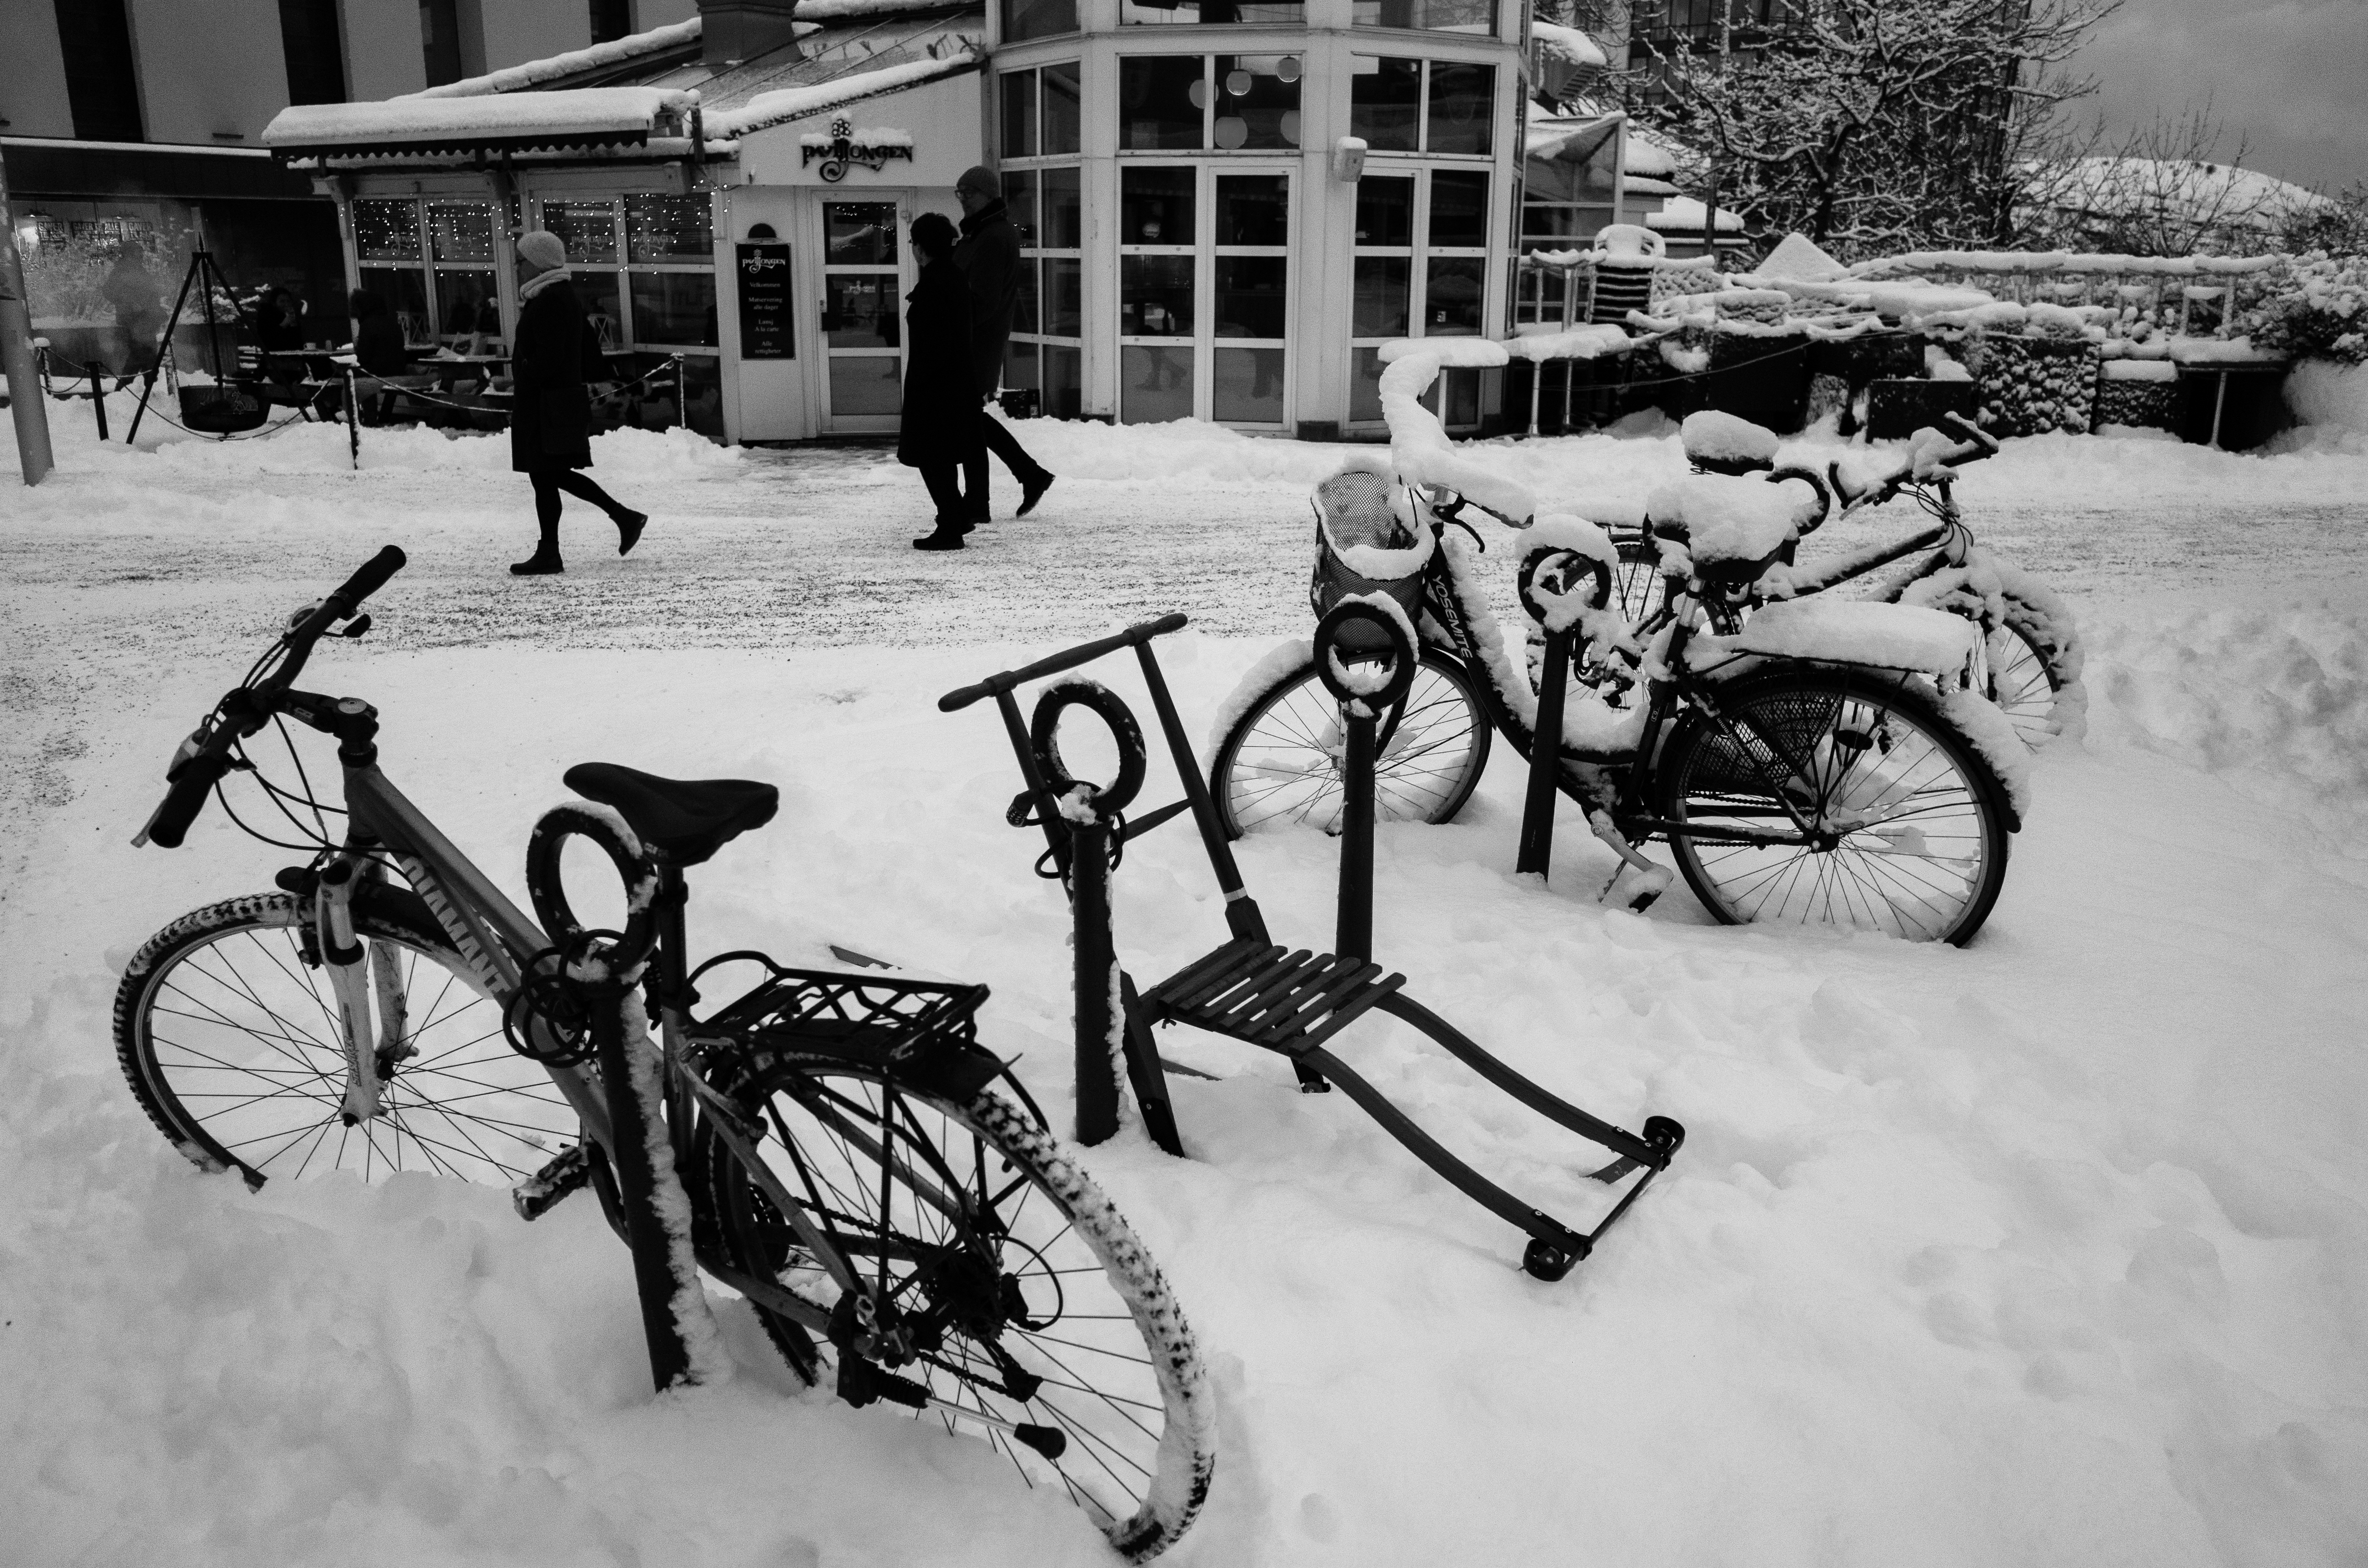 Kicksled & Bicycles in snow. Bodø, Norway (23706514231)